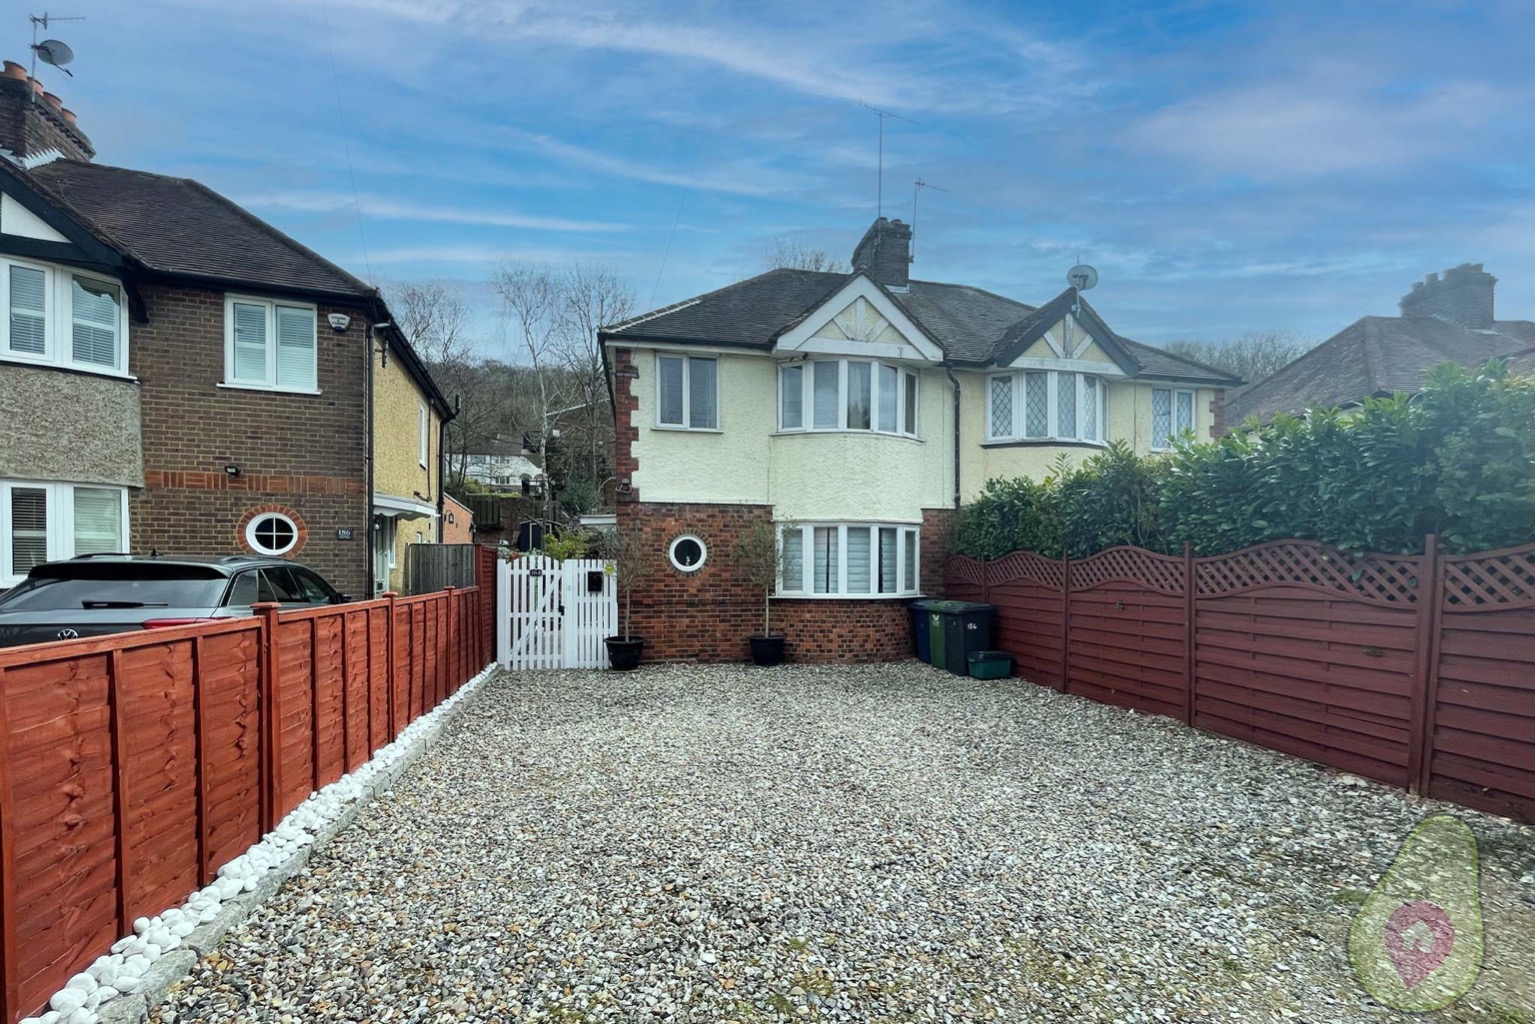 **CHECK OUT THE PROPERTY VIDEO** This is an immaculately presented three bedroom semi detached home. It features a beautiful Orangery that looks over the rear garden & also a Summer House with power and lighting. With three reception rooms and a refitted bathroom suite.